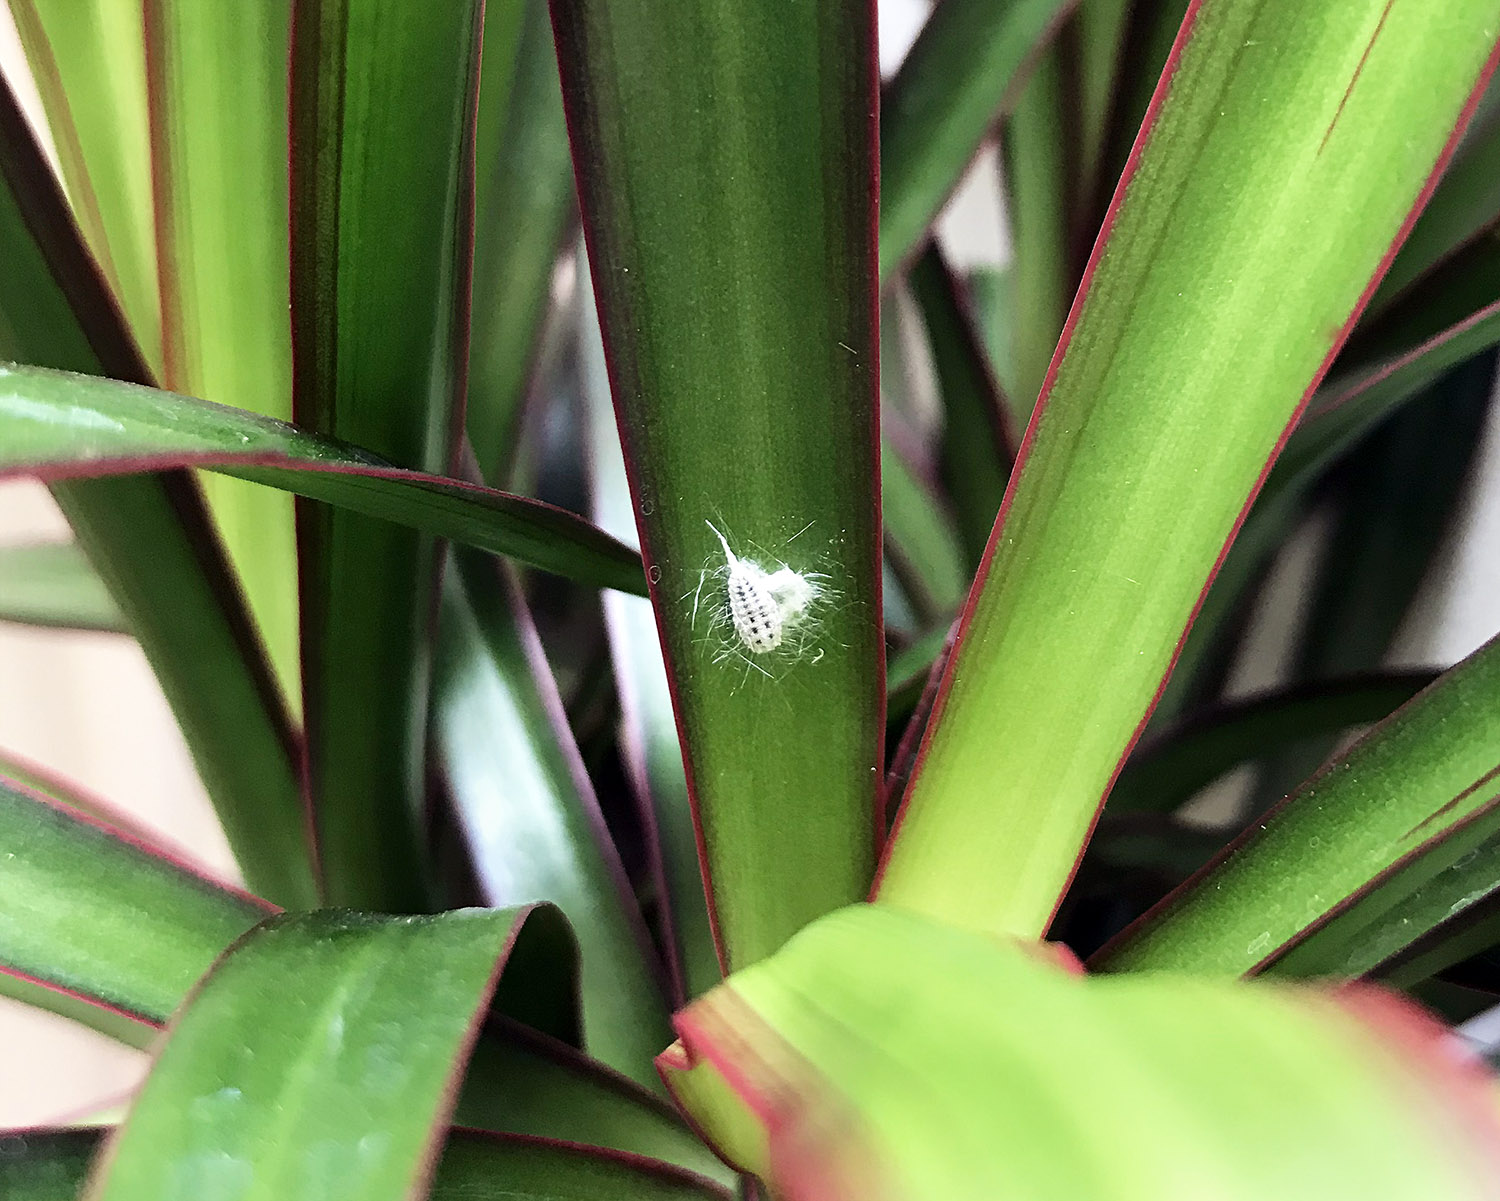 How to Control Fungus Gnats on Spider Plants